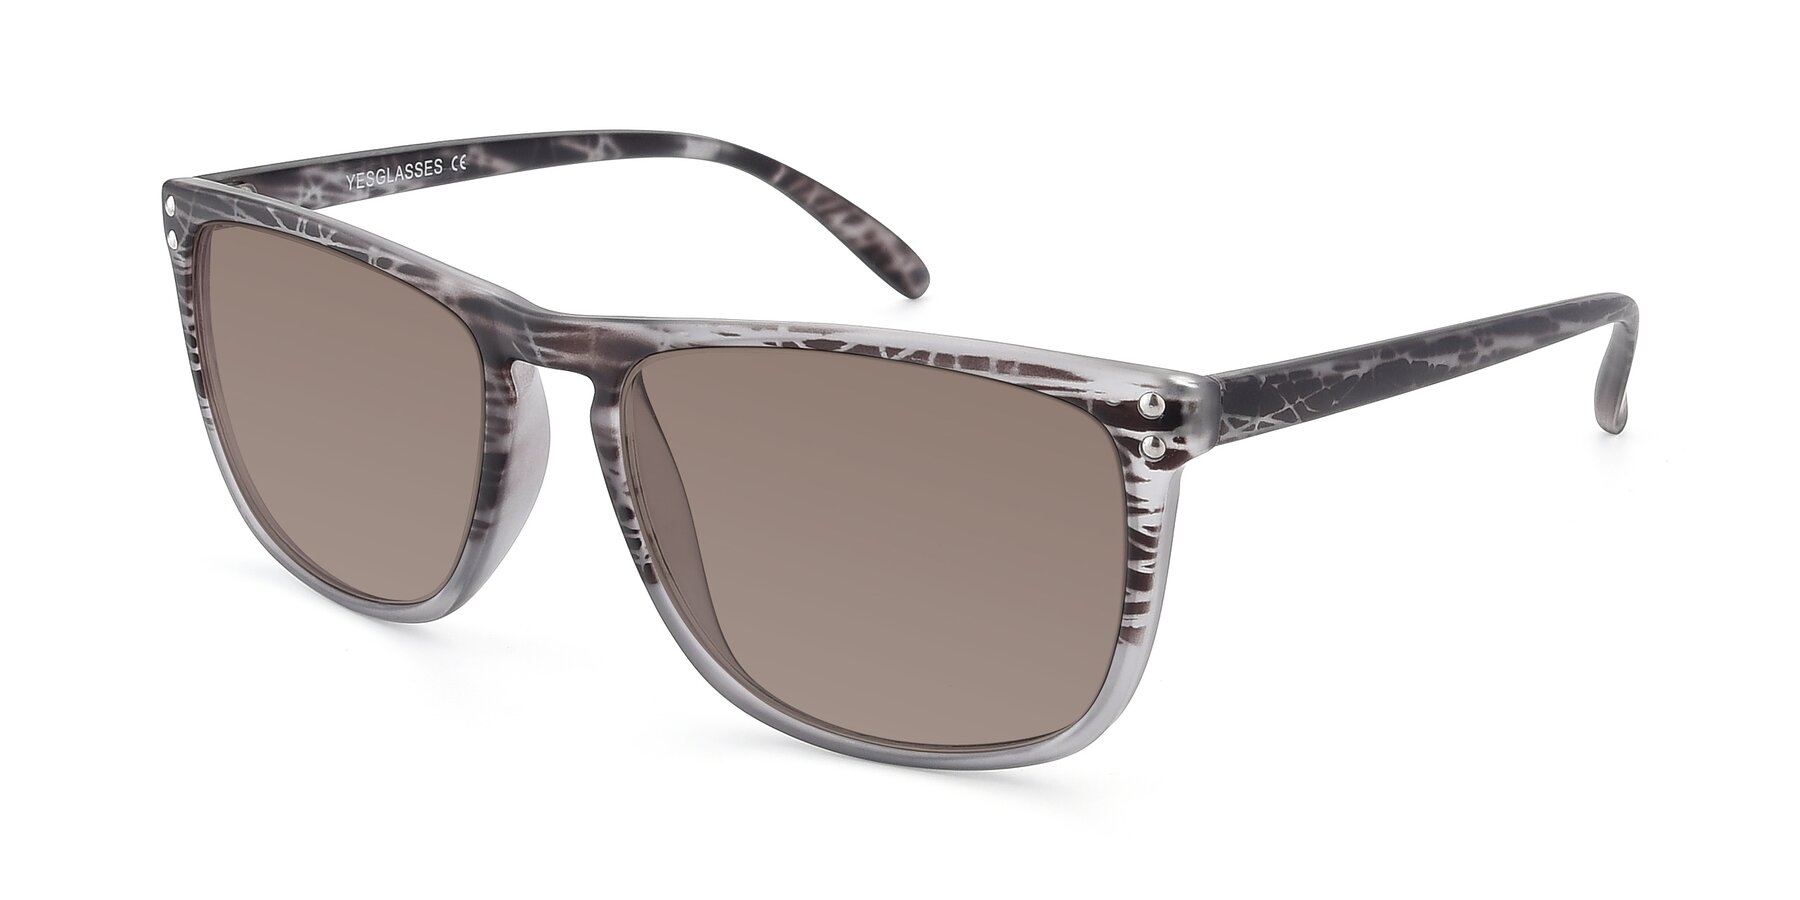 Angle of SSR411 in Translucent Floral Grey with Medium Brown Tinted Lenses